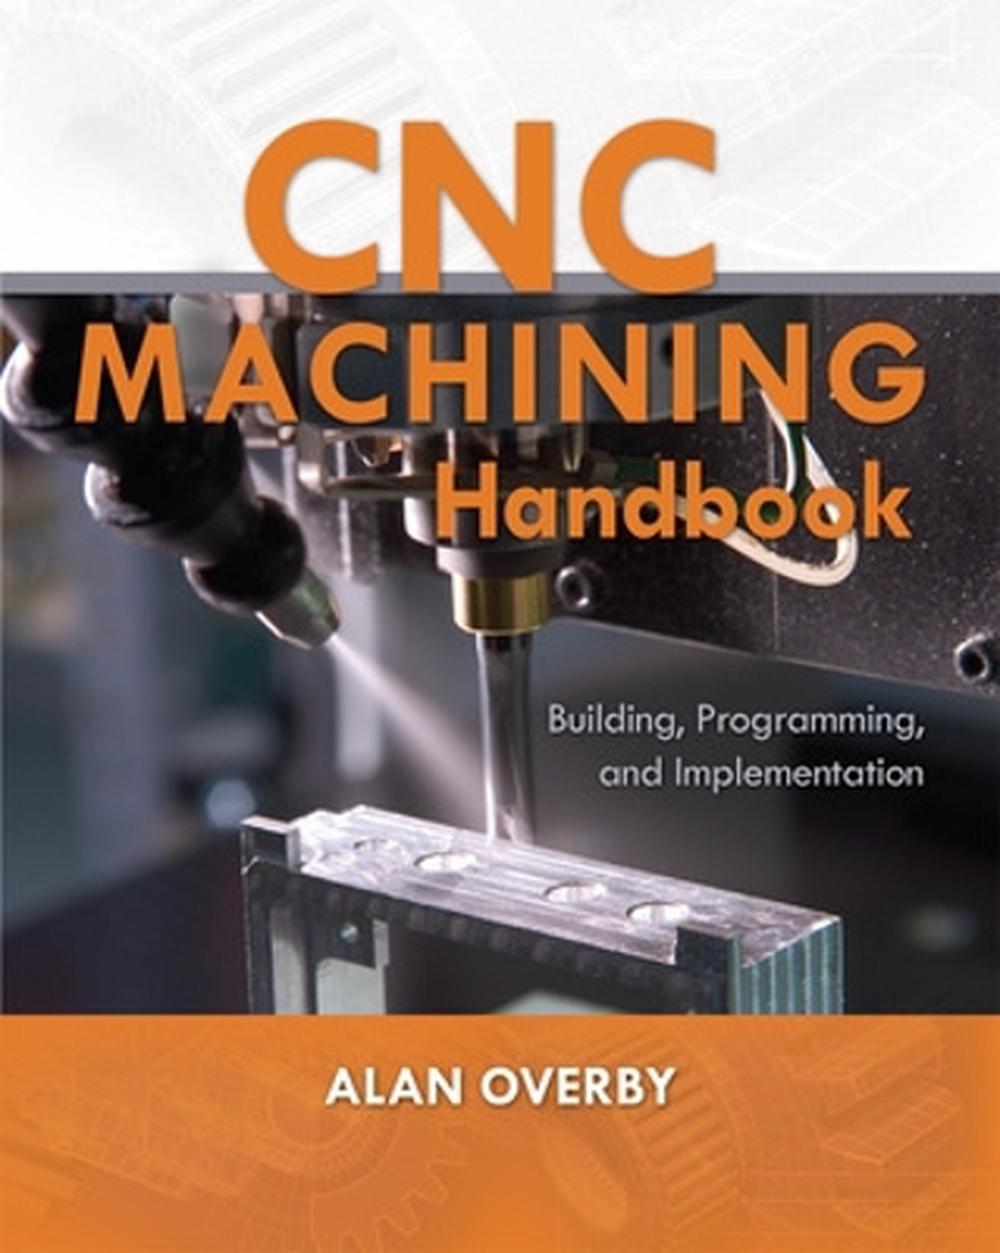 CNC Machining Handbook Building, Programming, and Implementation by